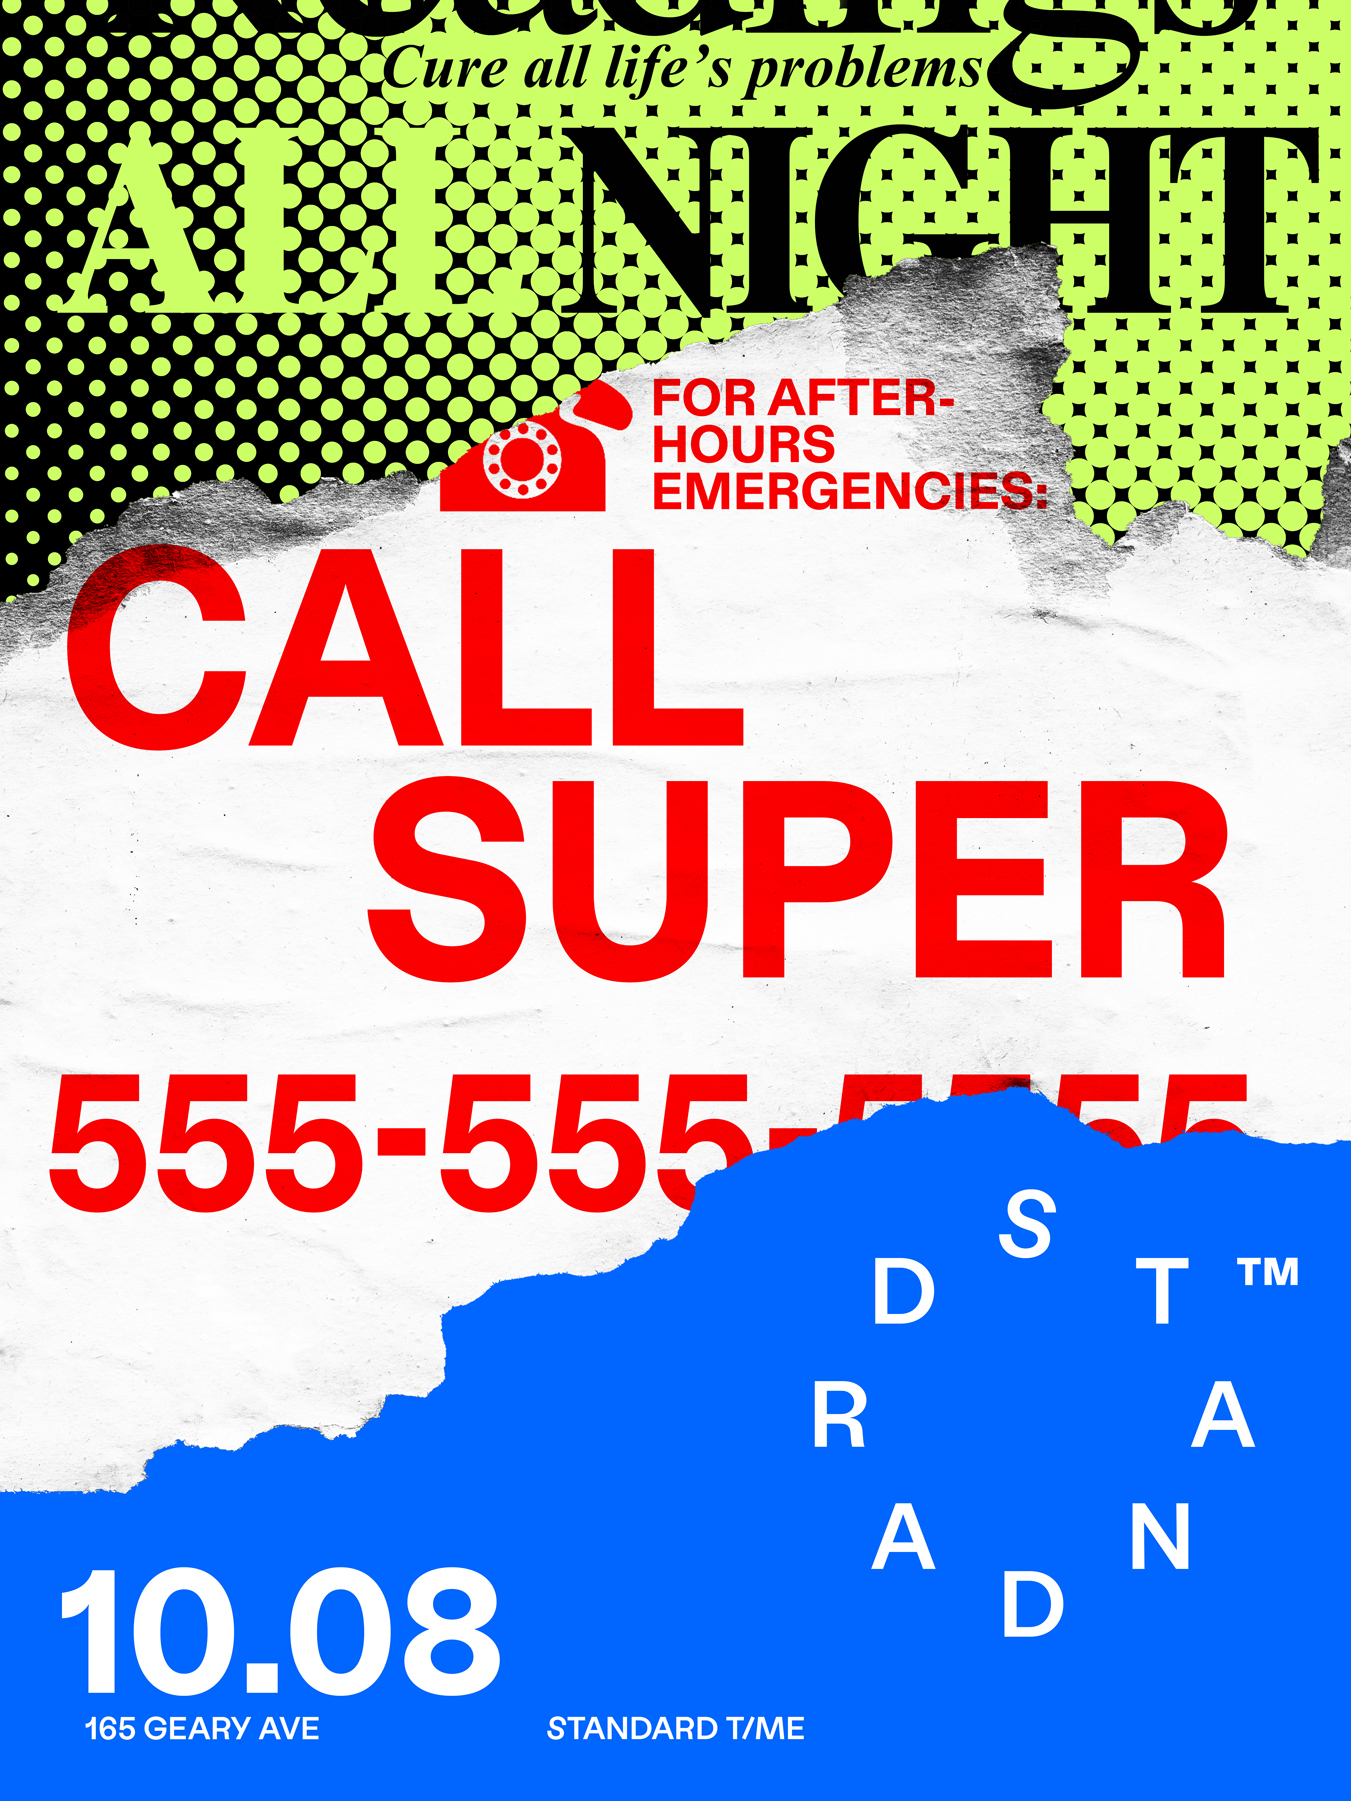 004: Call Super All Night - Flyer front